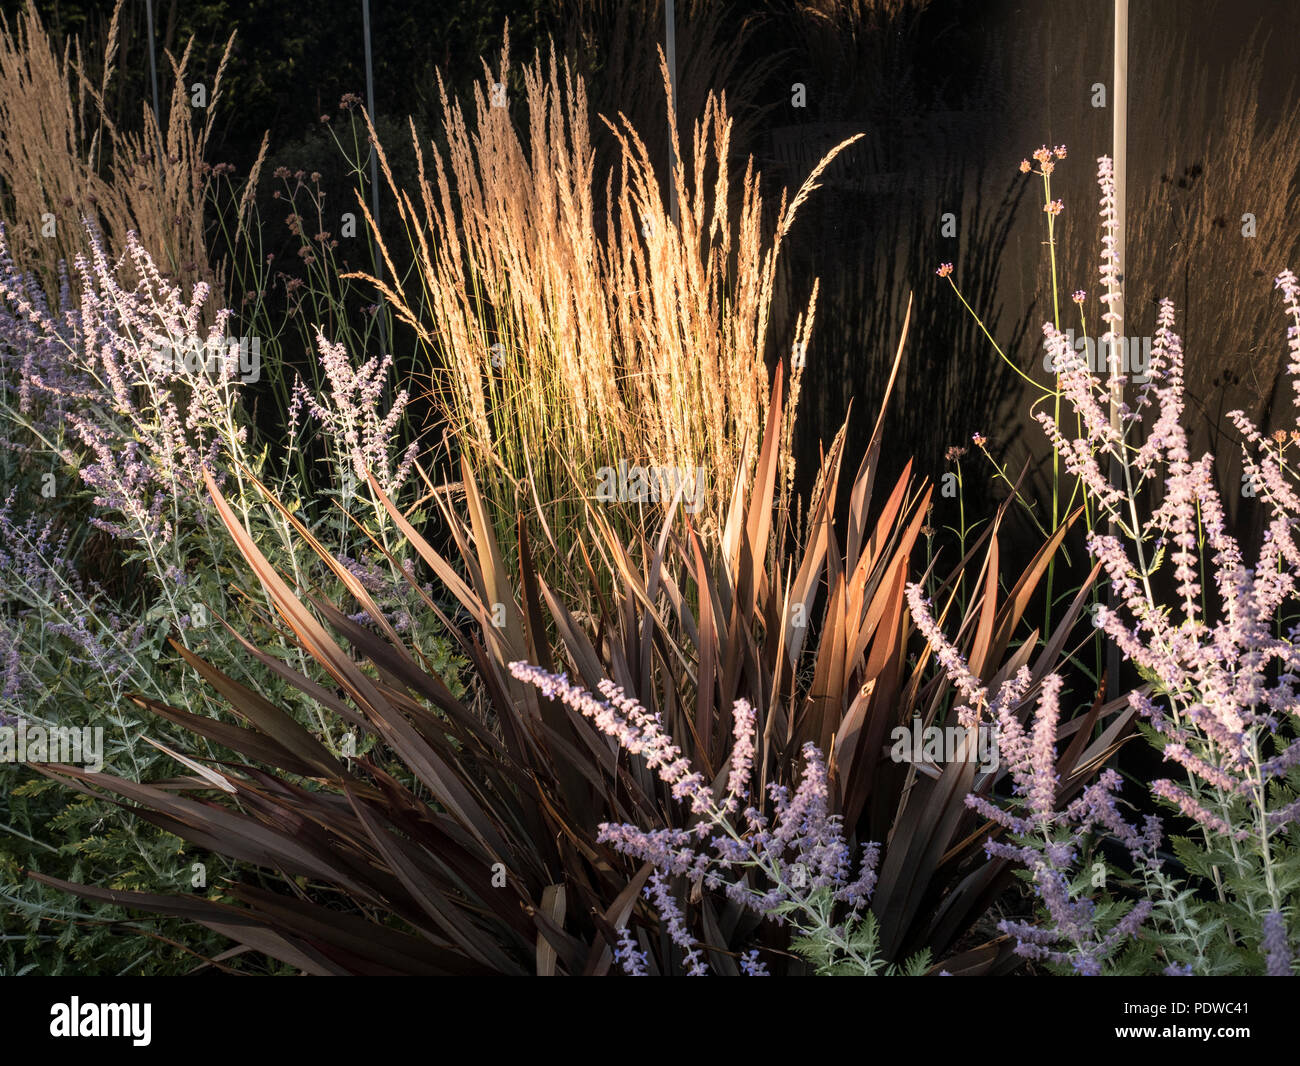 Architectural planting of grasses and drought resistant plants Stock Photo